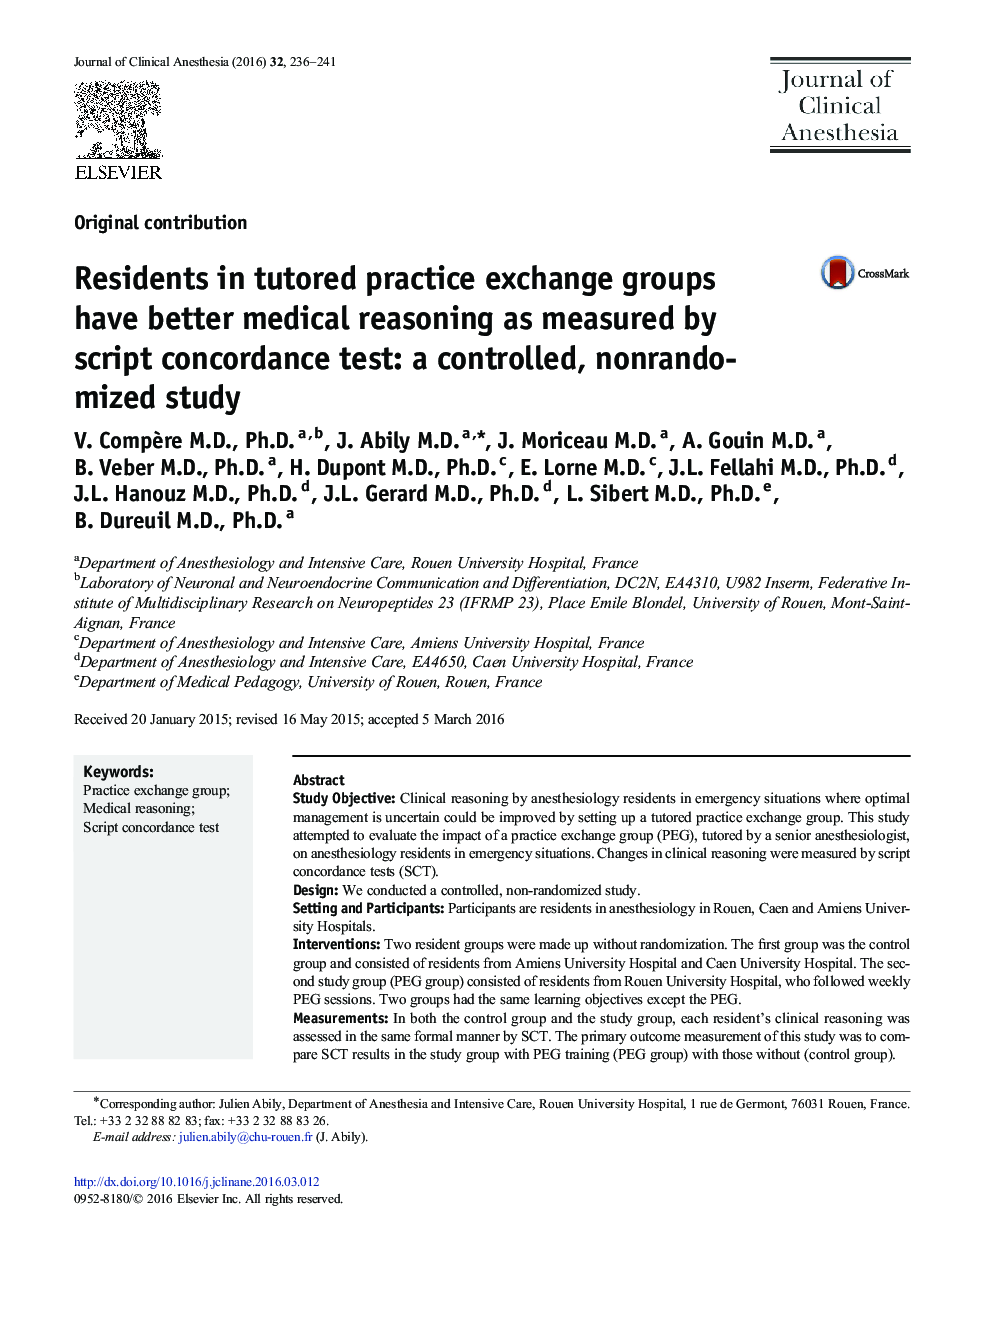 Residents in tutored practice exchange groups have better medical reasoning as measured by script concordance test: a controlled, nonrandomized study